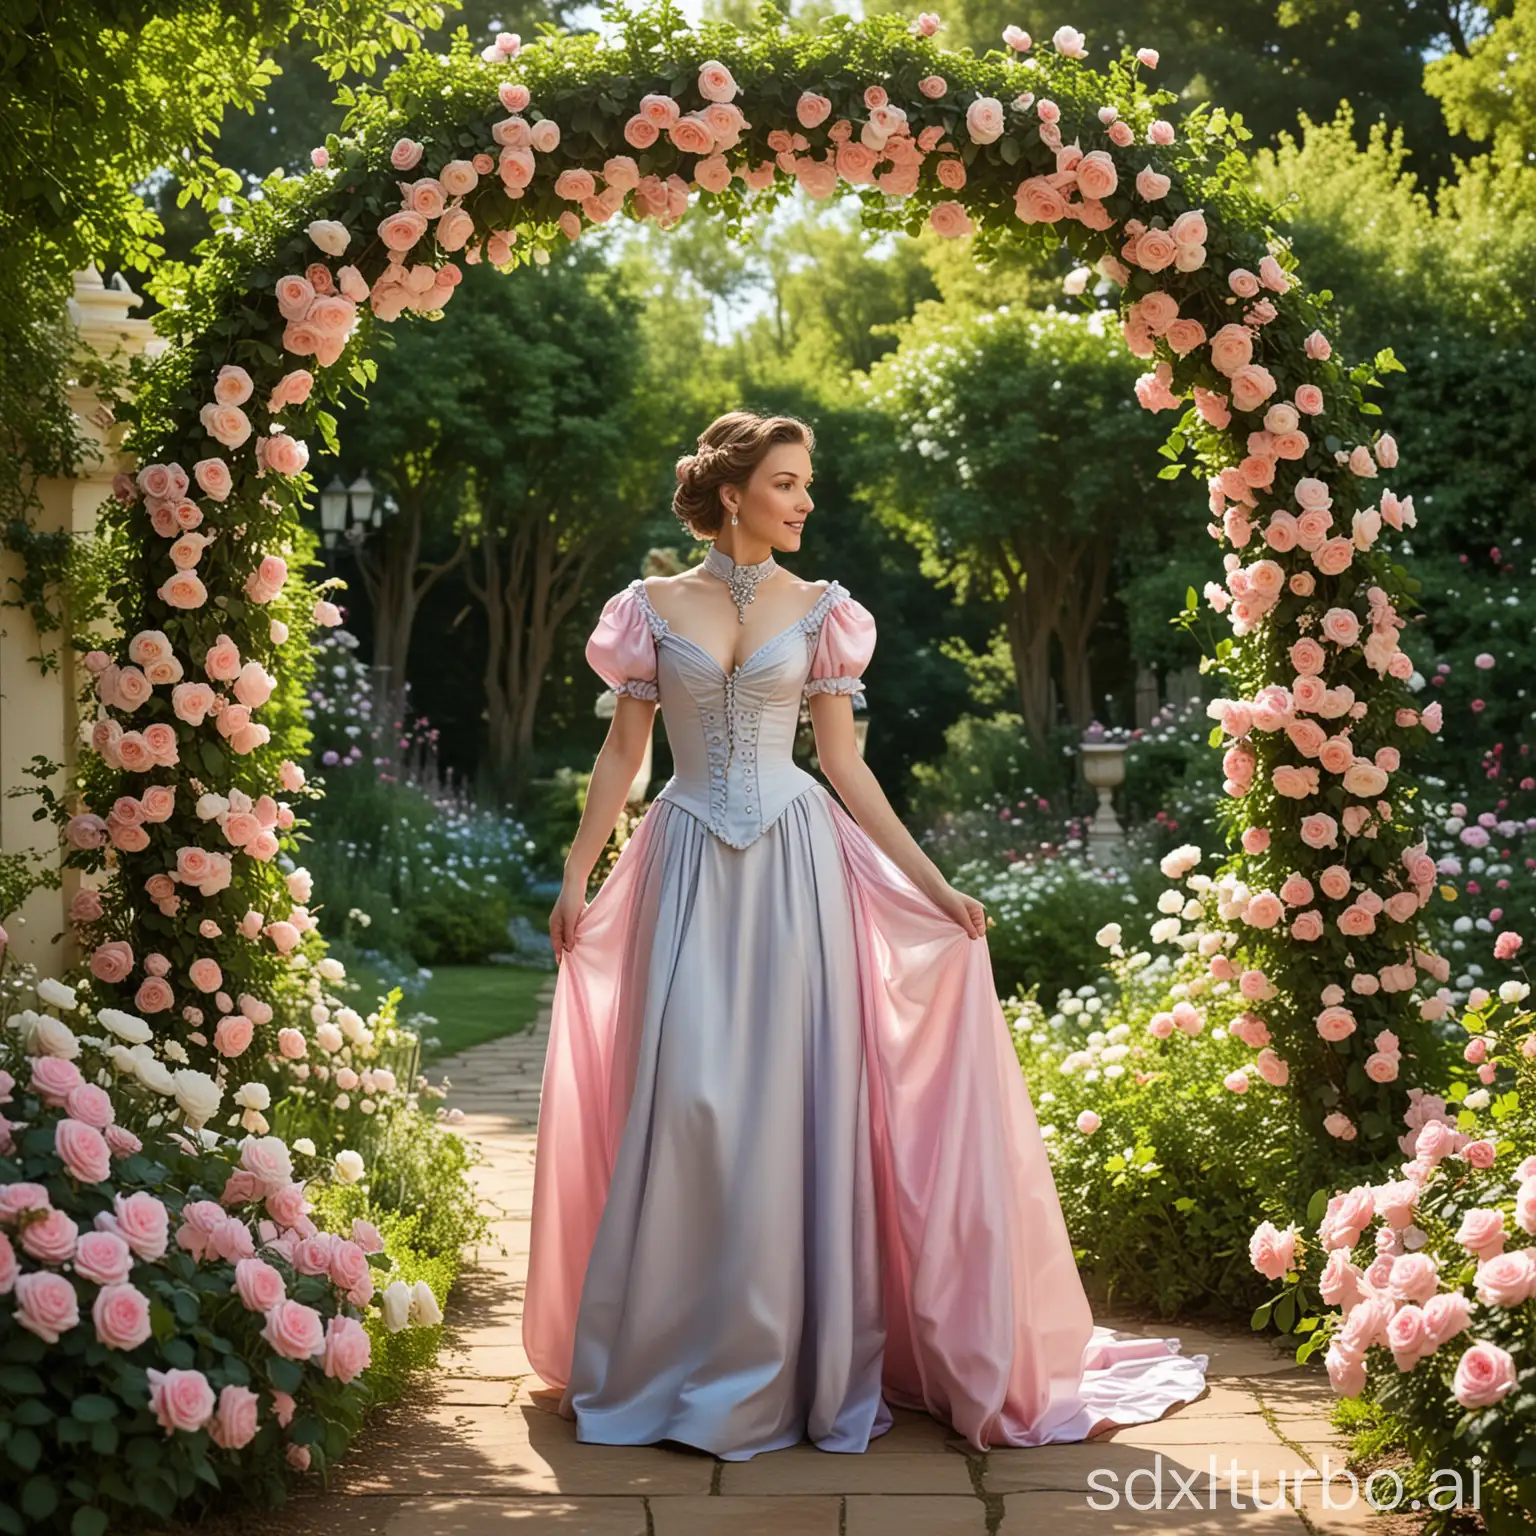 Woman-in-Regal-Attire-Amidst-Rose-Garden-with-Blue-Archway